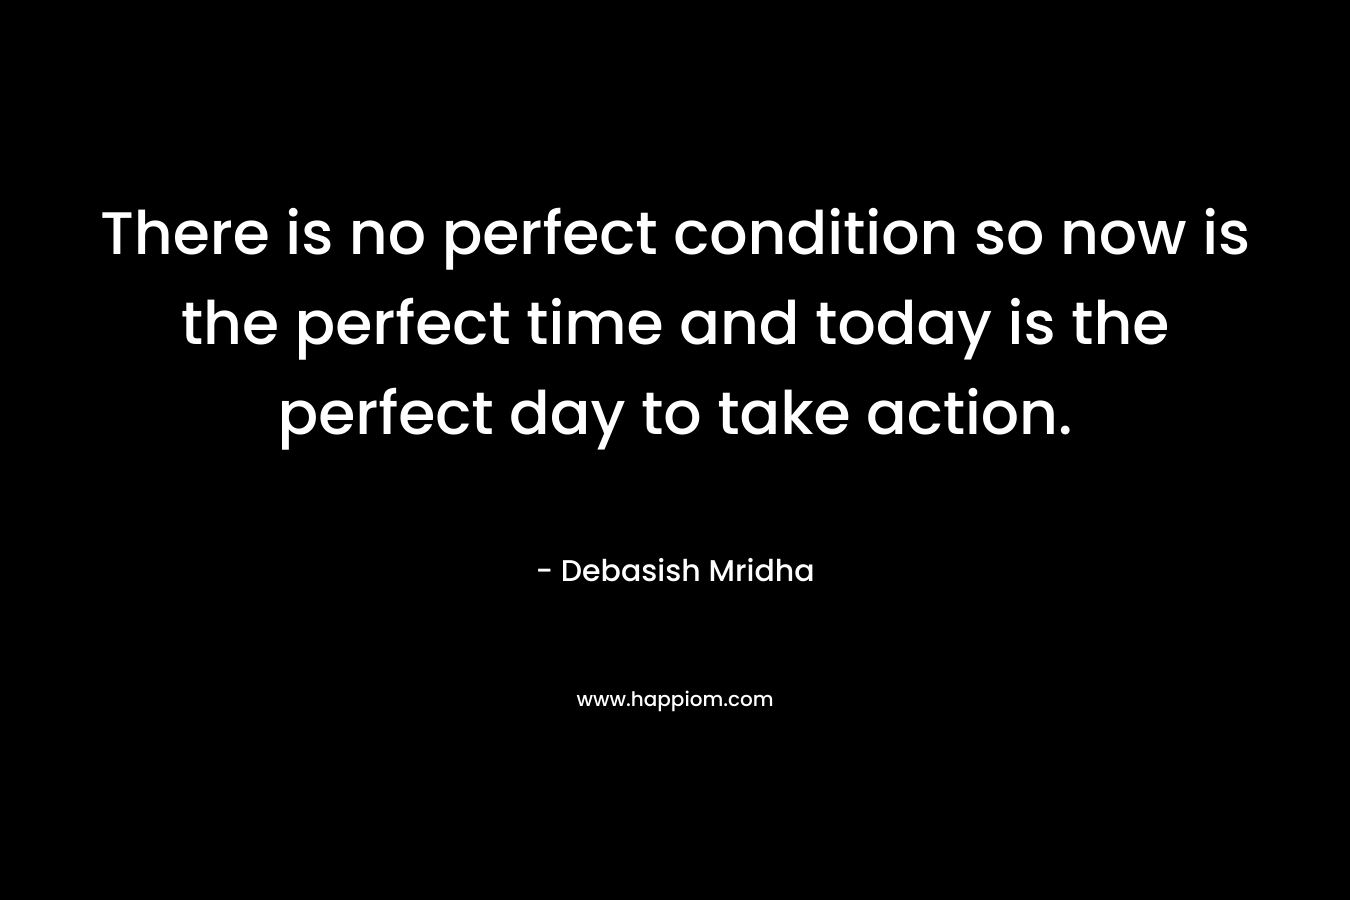 There is no perfect condition so now is the perfect time and today is the perfect day to take action.